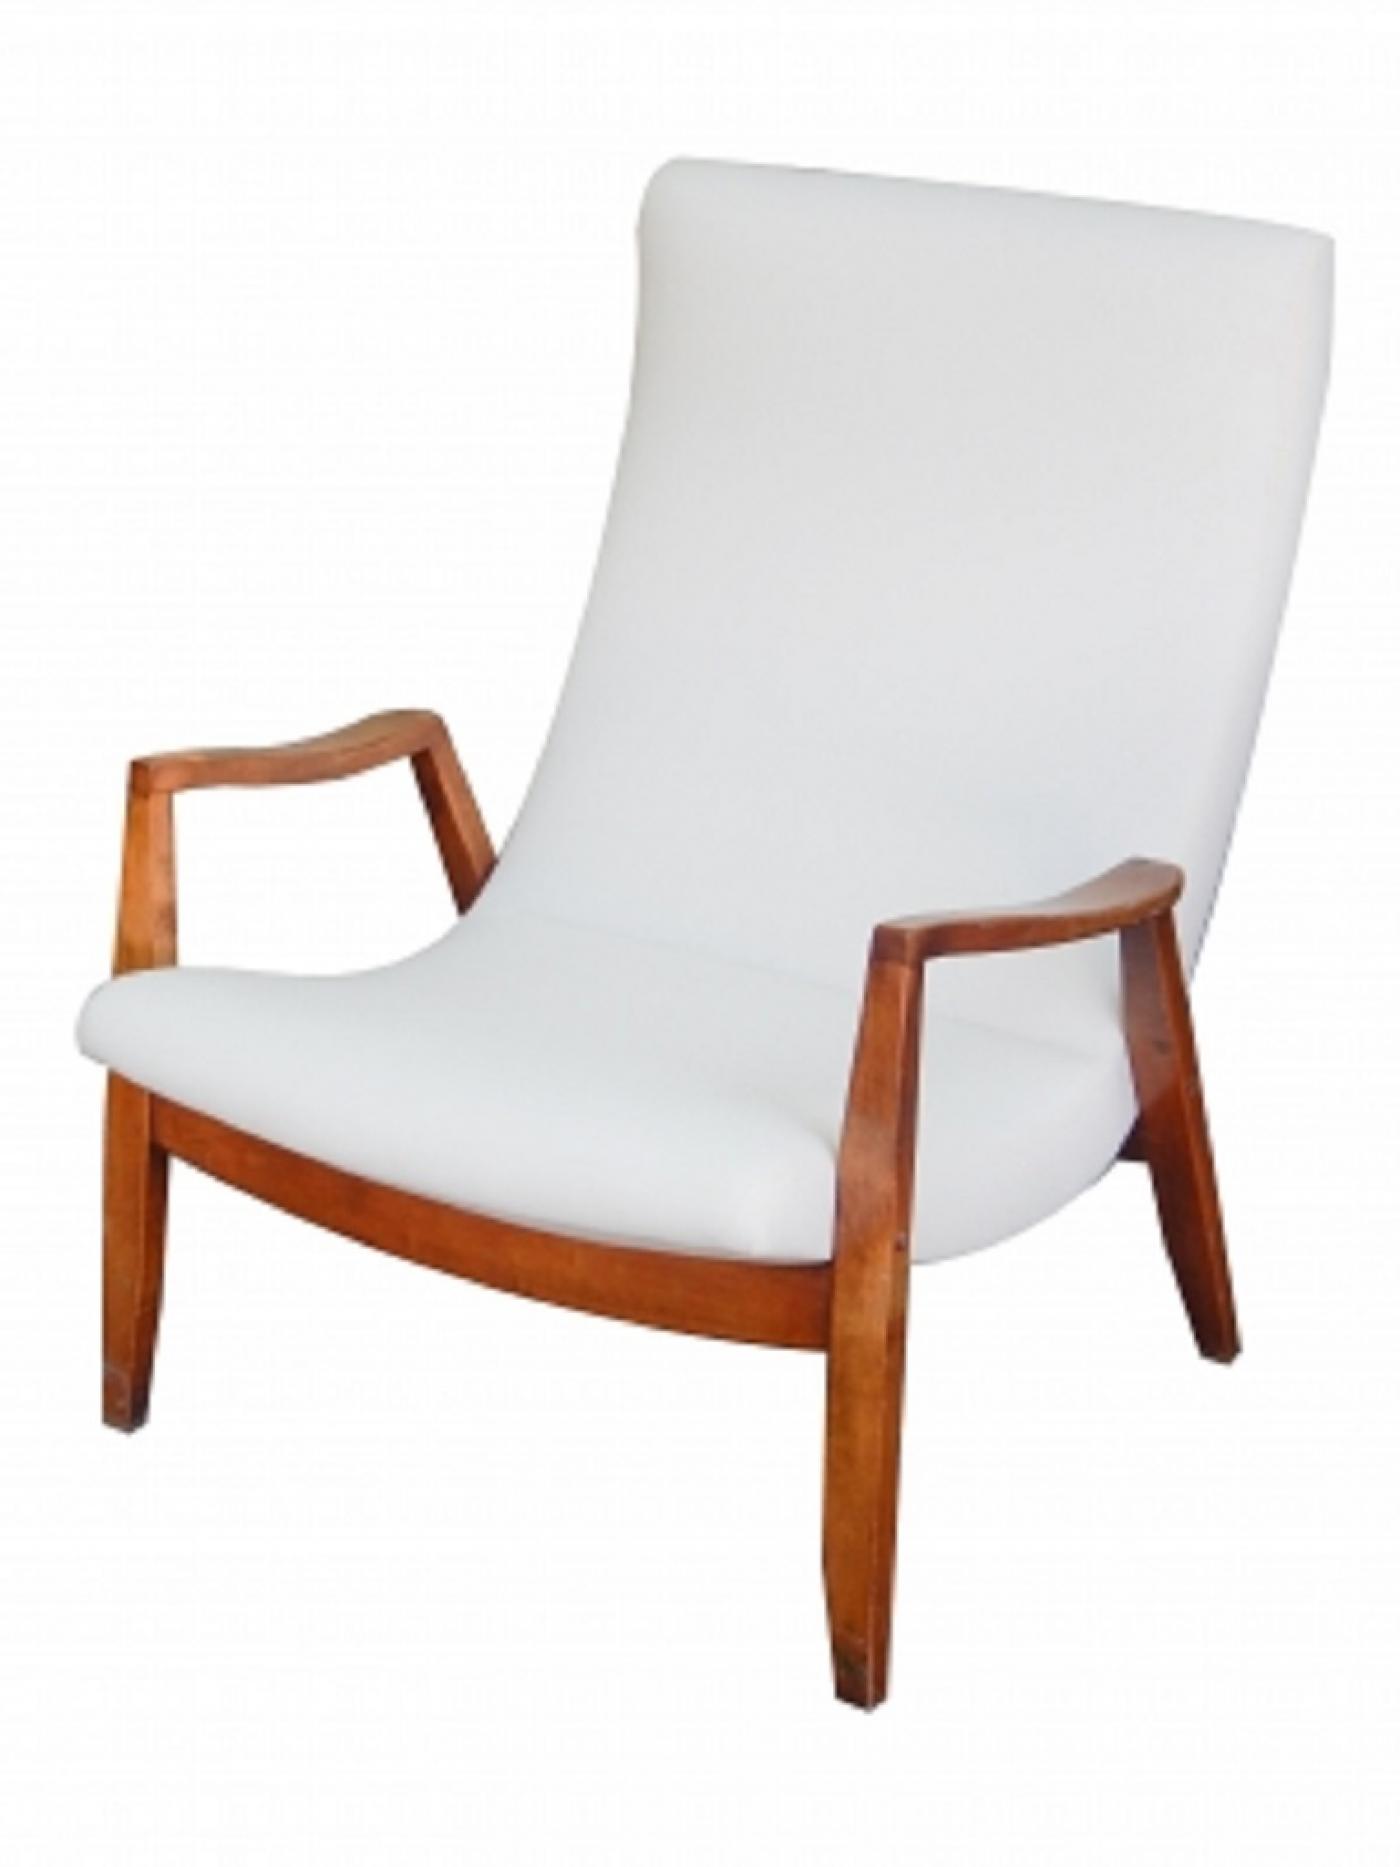 Mid-century lounge chair with ottoman